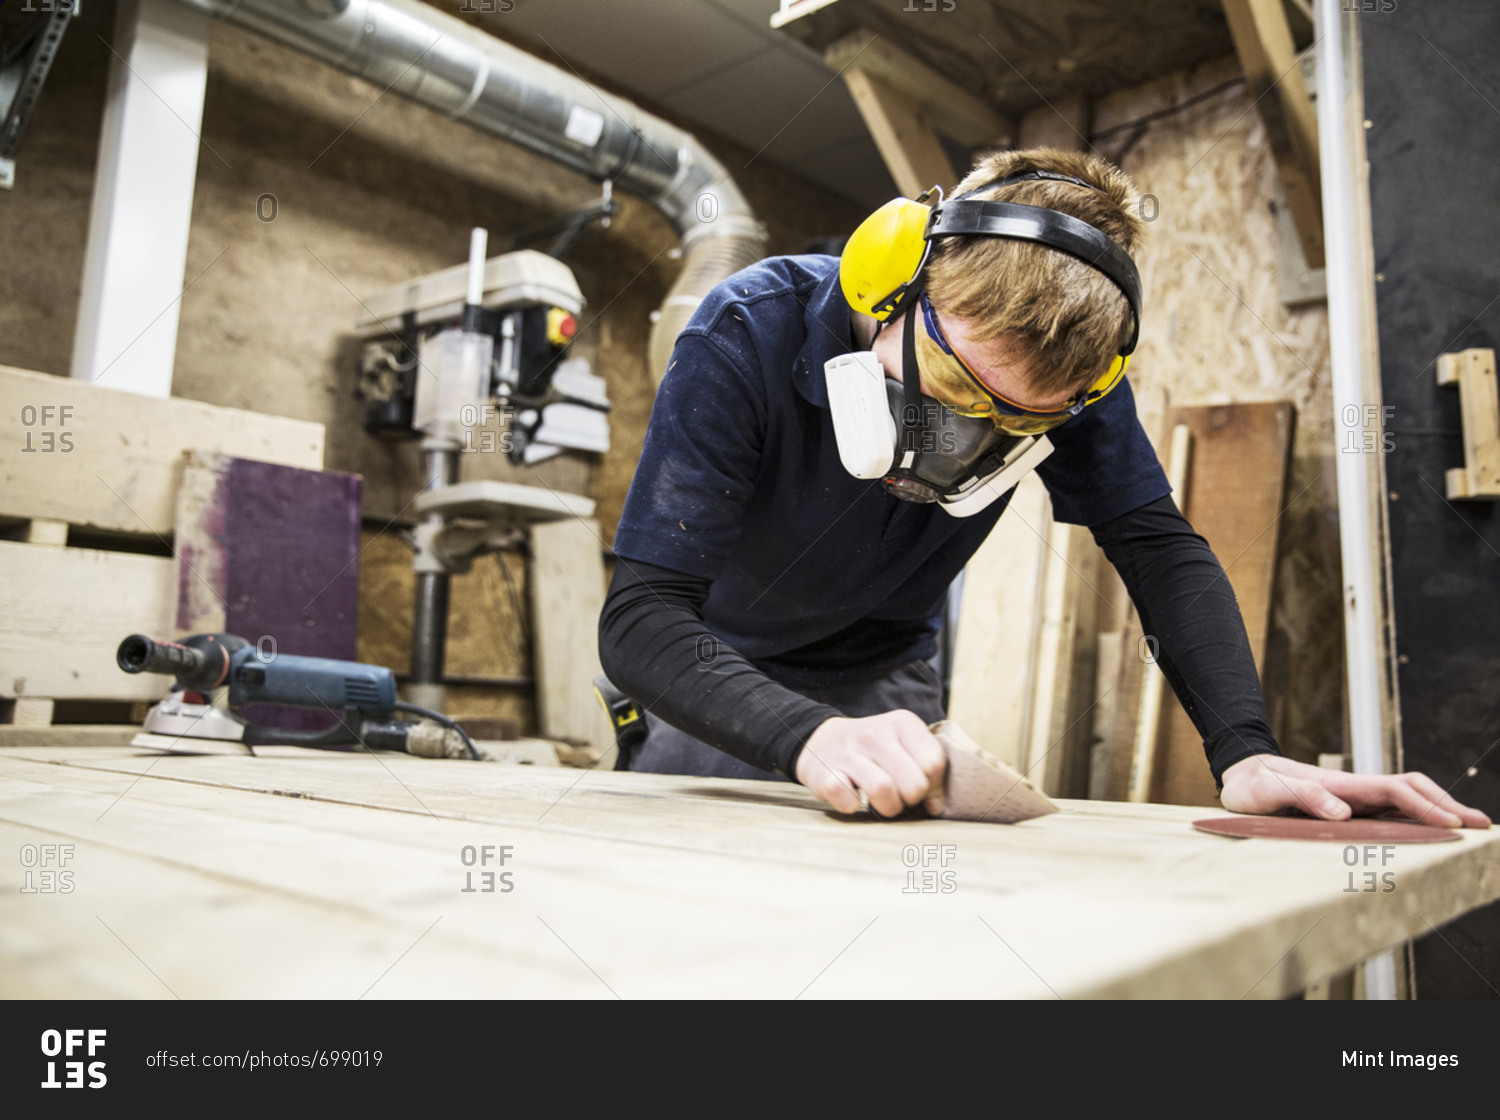 Man wearing ear protectors, protective goggles and dust mask standing in a warehouse, working on a piece of wood